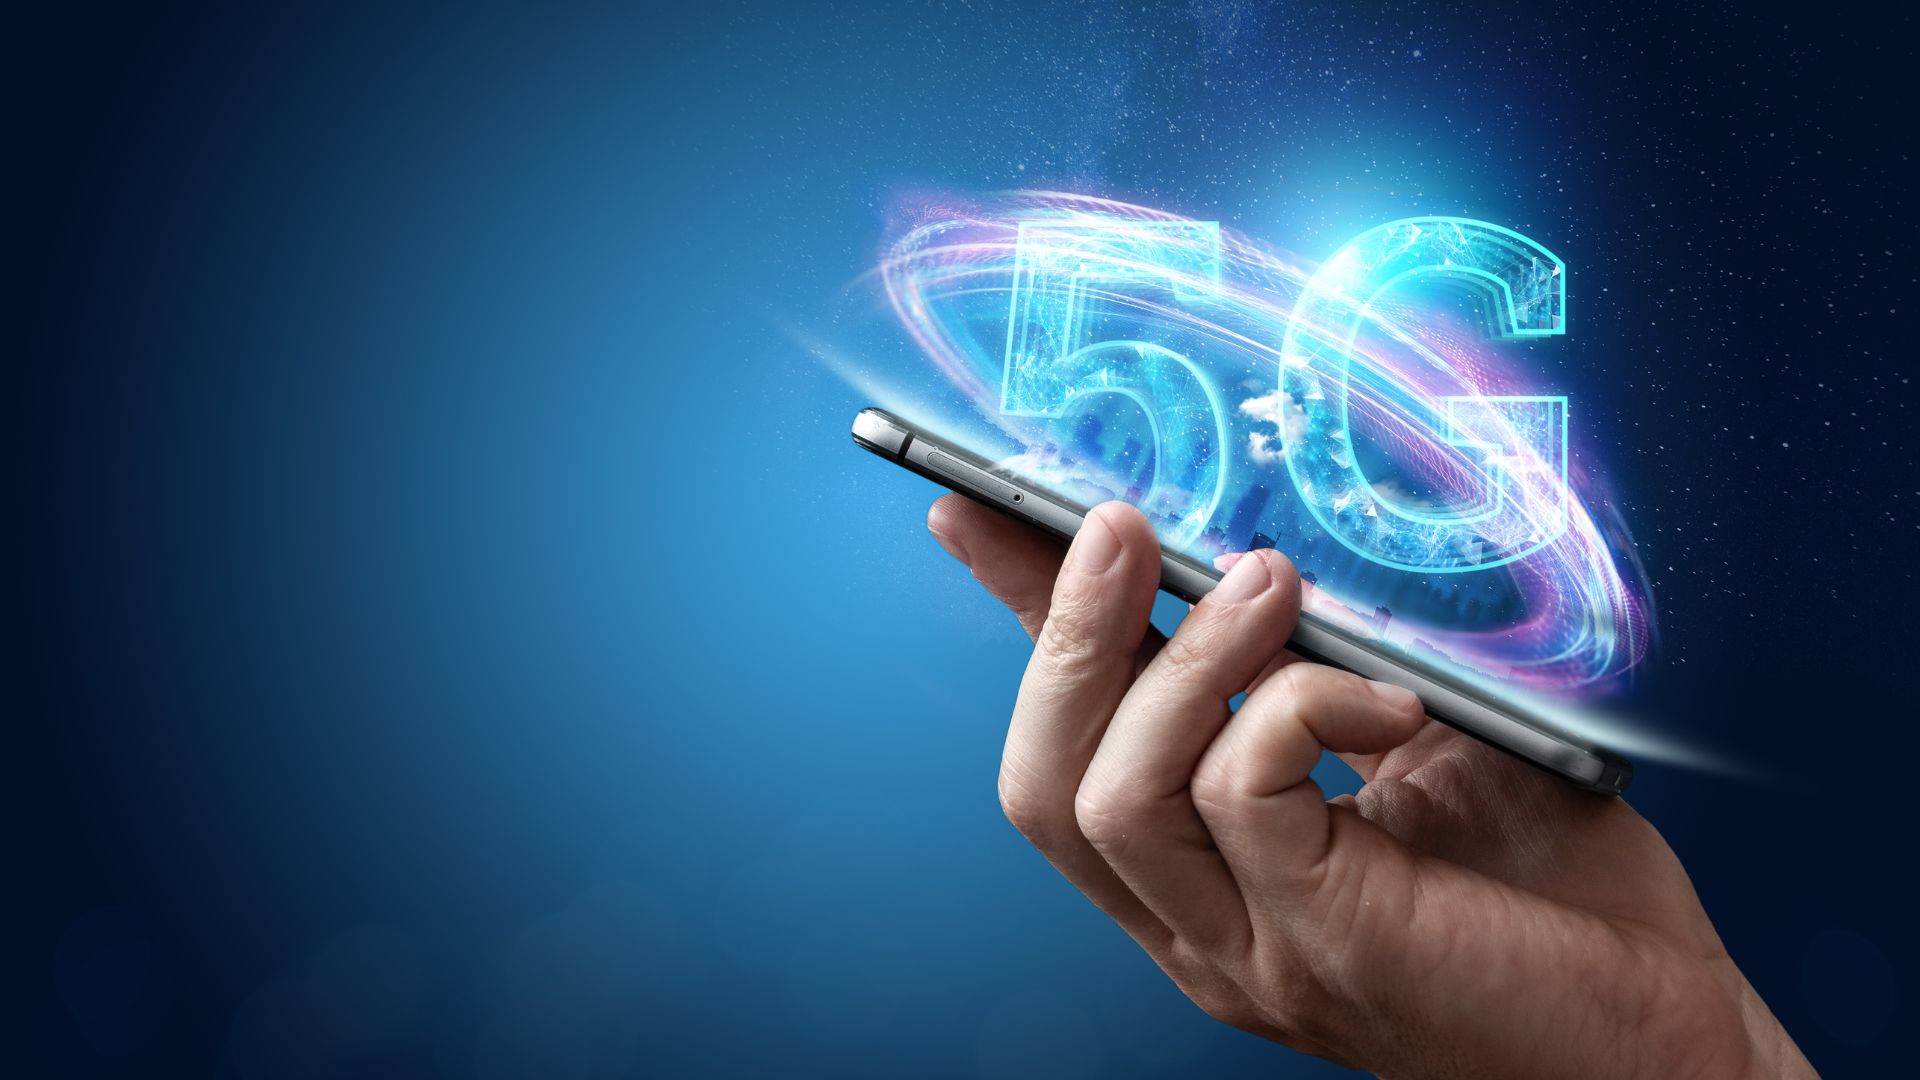 3G to 5G Innovations of the Evolution of Phones